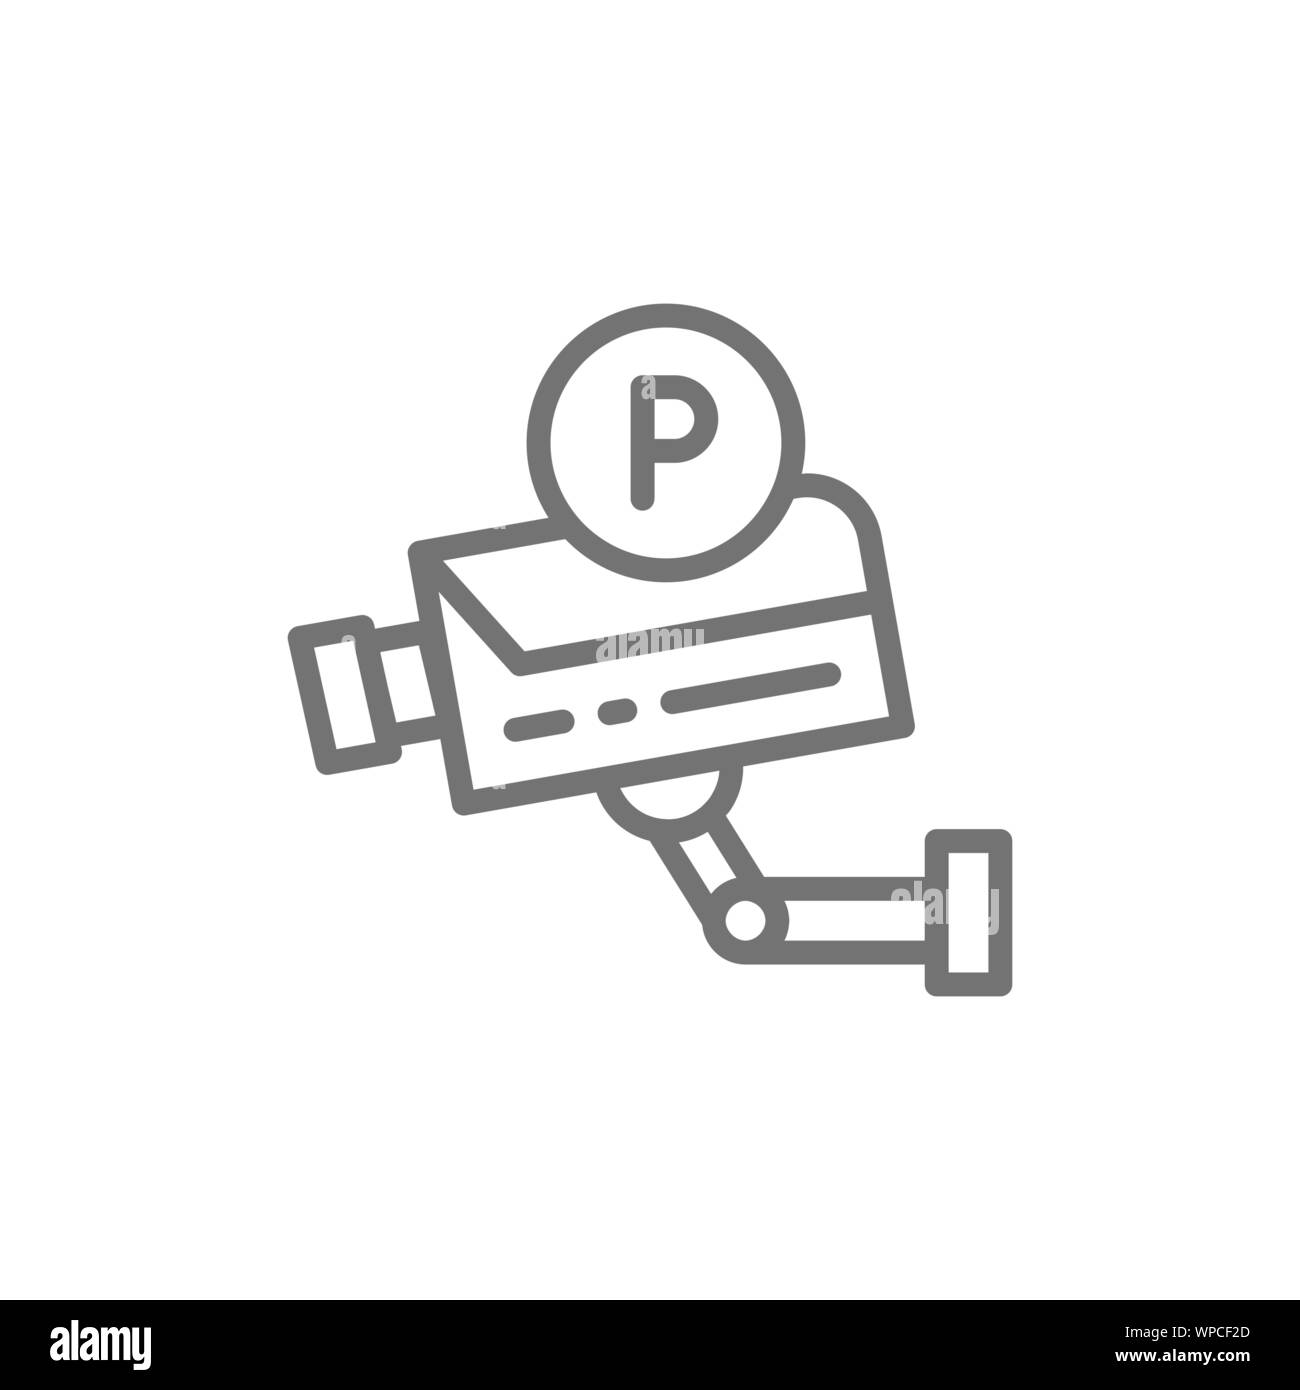 Parking security camera, surveillance system line icon. Stock Vector